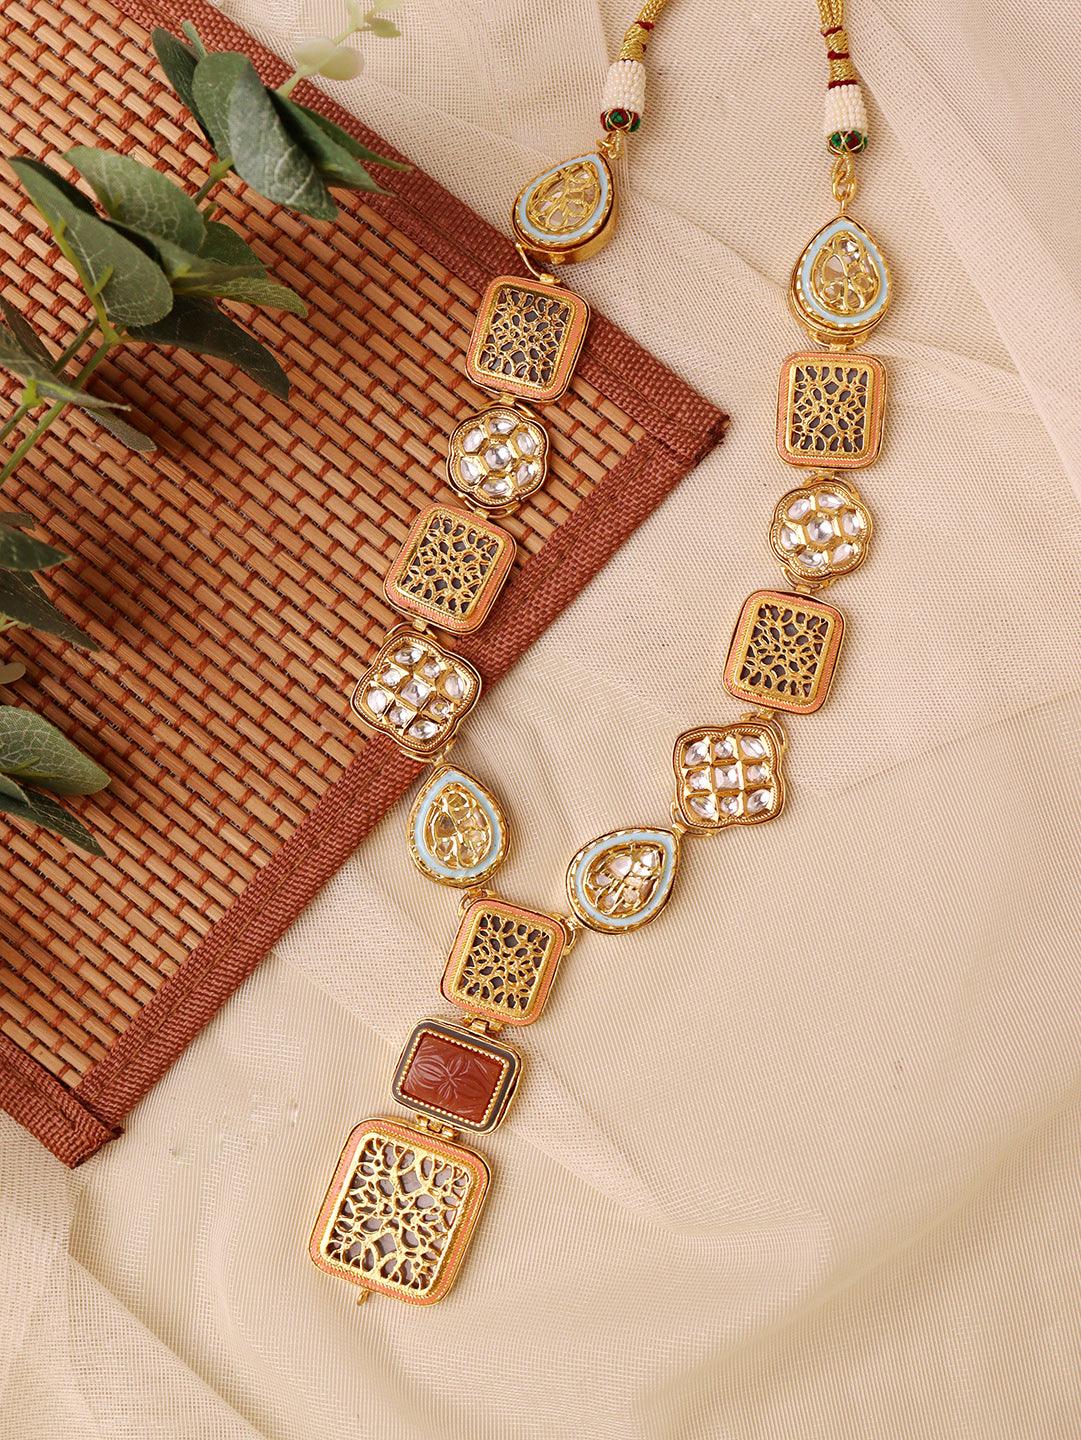 Meira Thewa and Enamel Necklace Set - Curio Cottage 